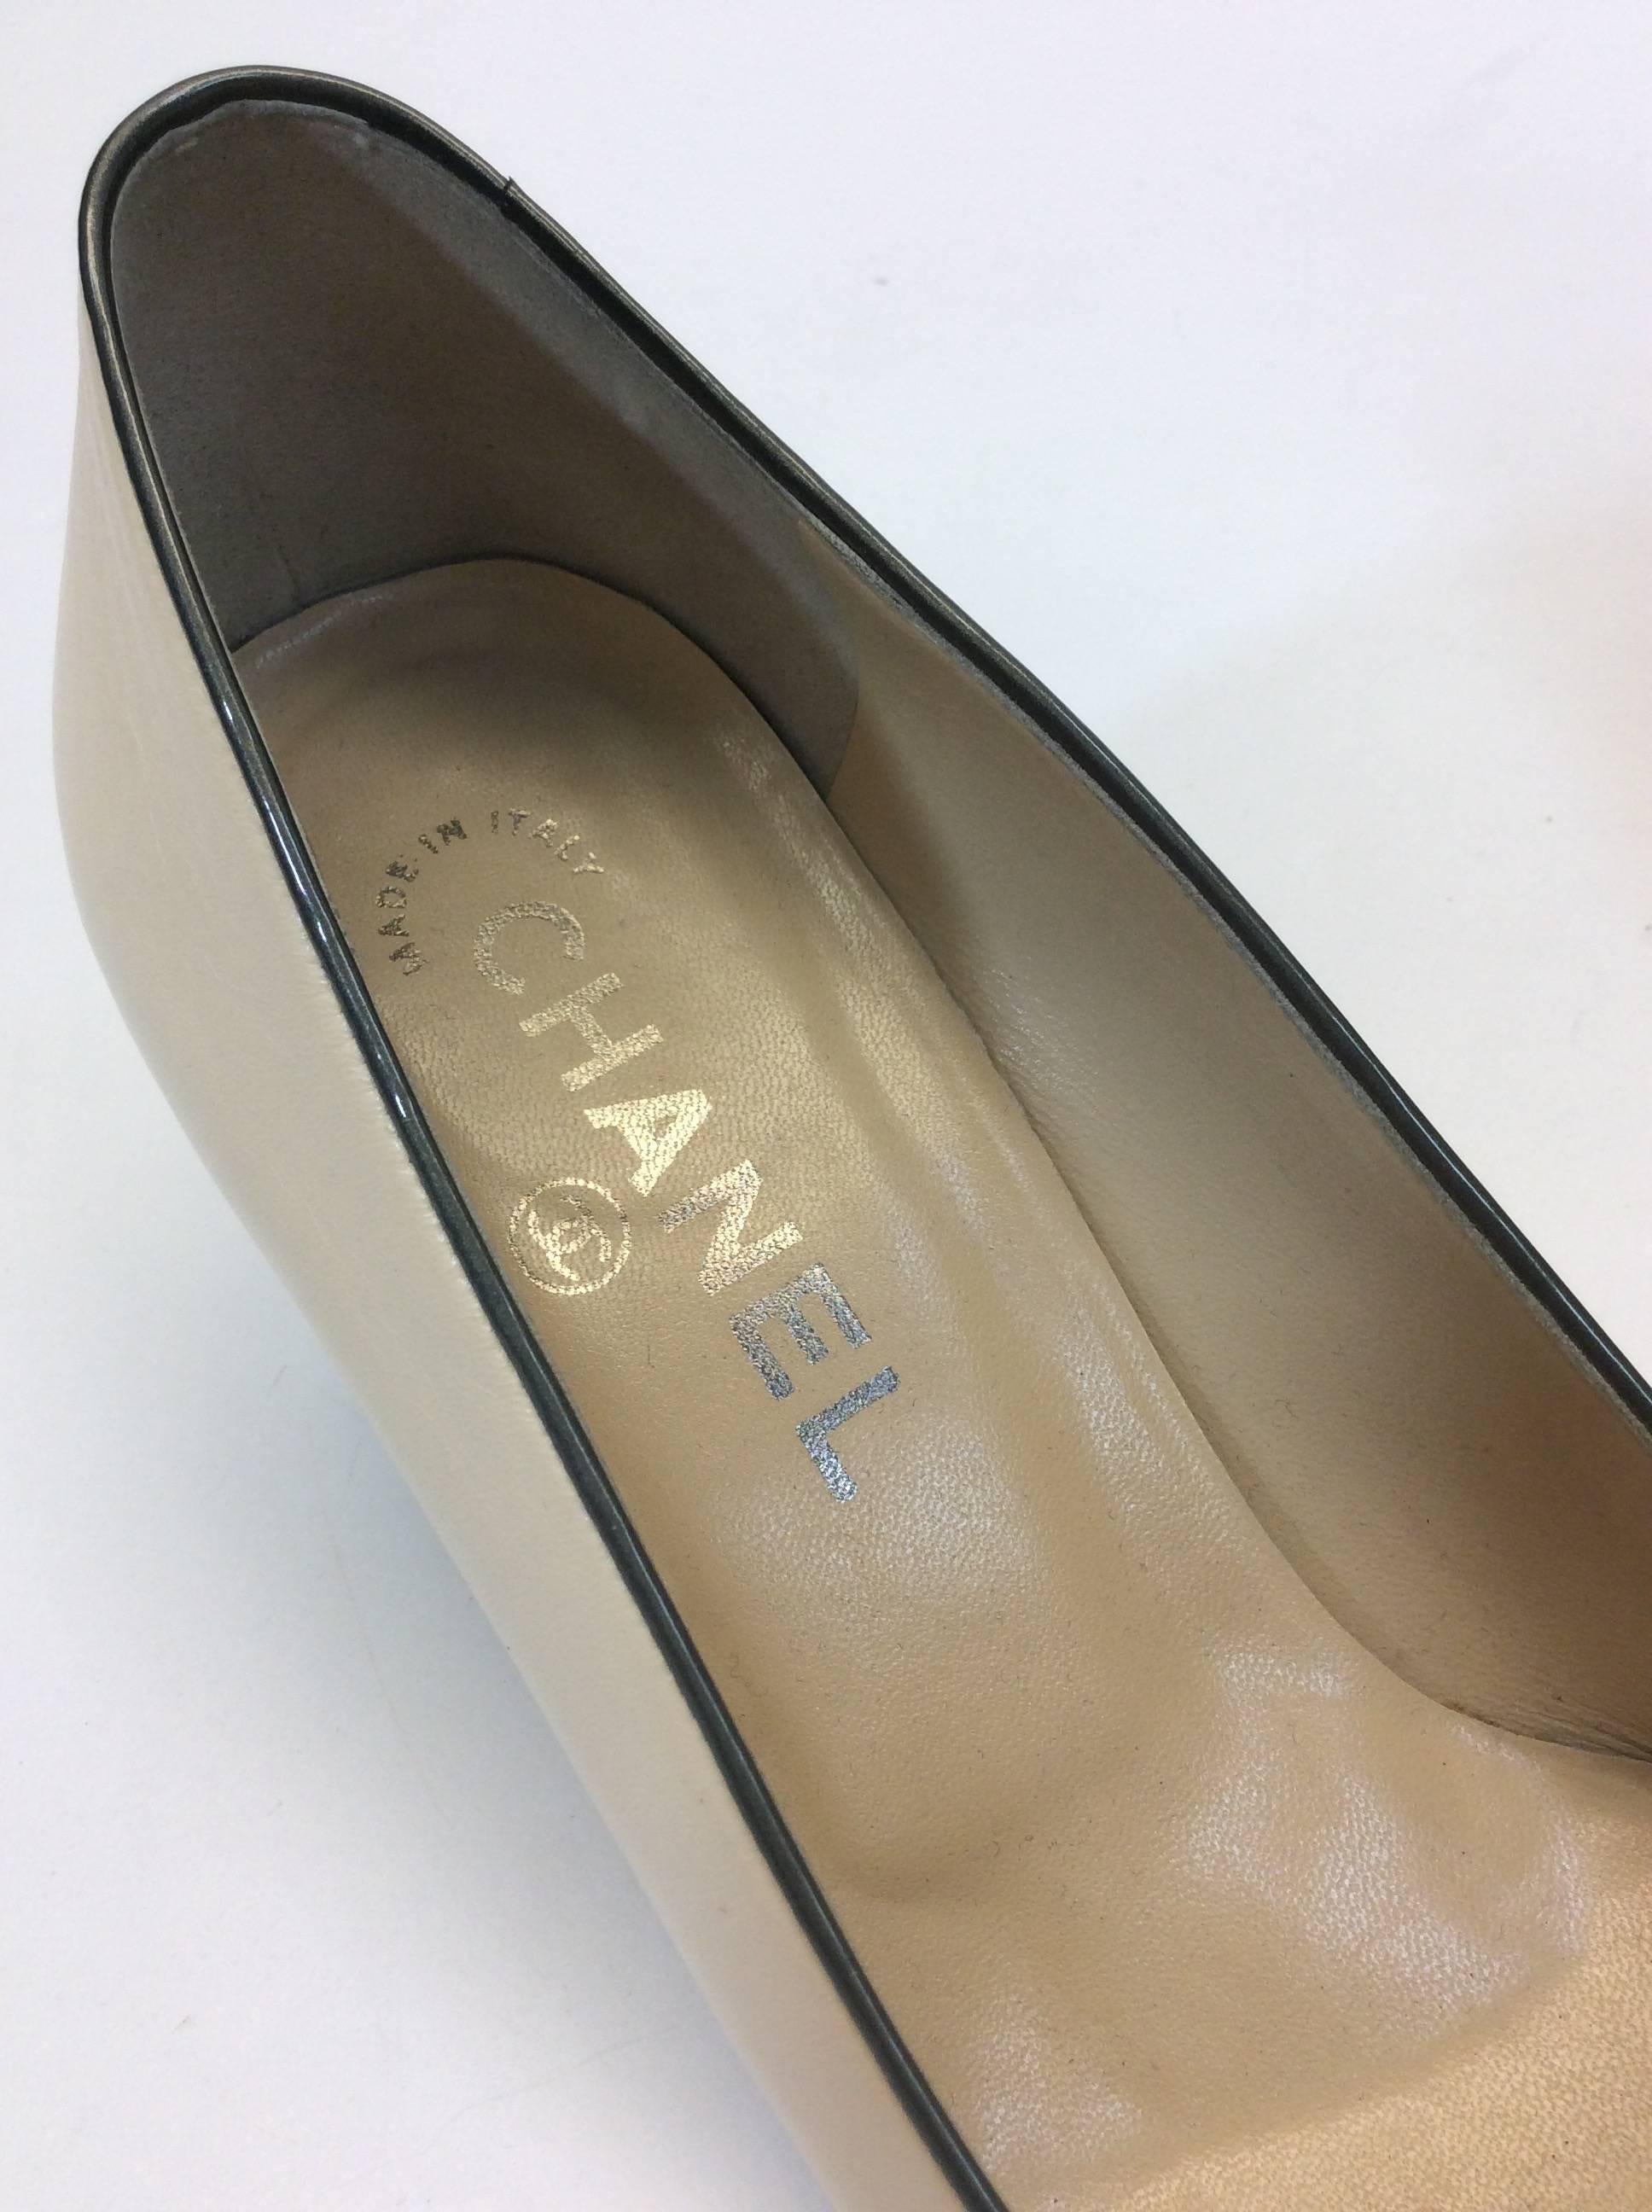 Chanel Tan Leather with Patent Leather Olive/Black Cap Toe Heel  For Sale 3